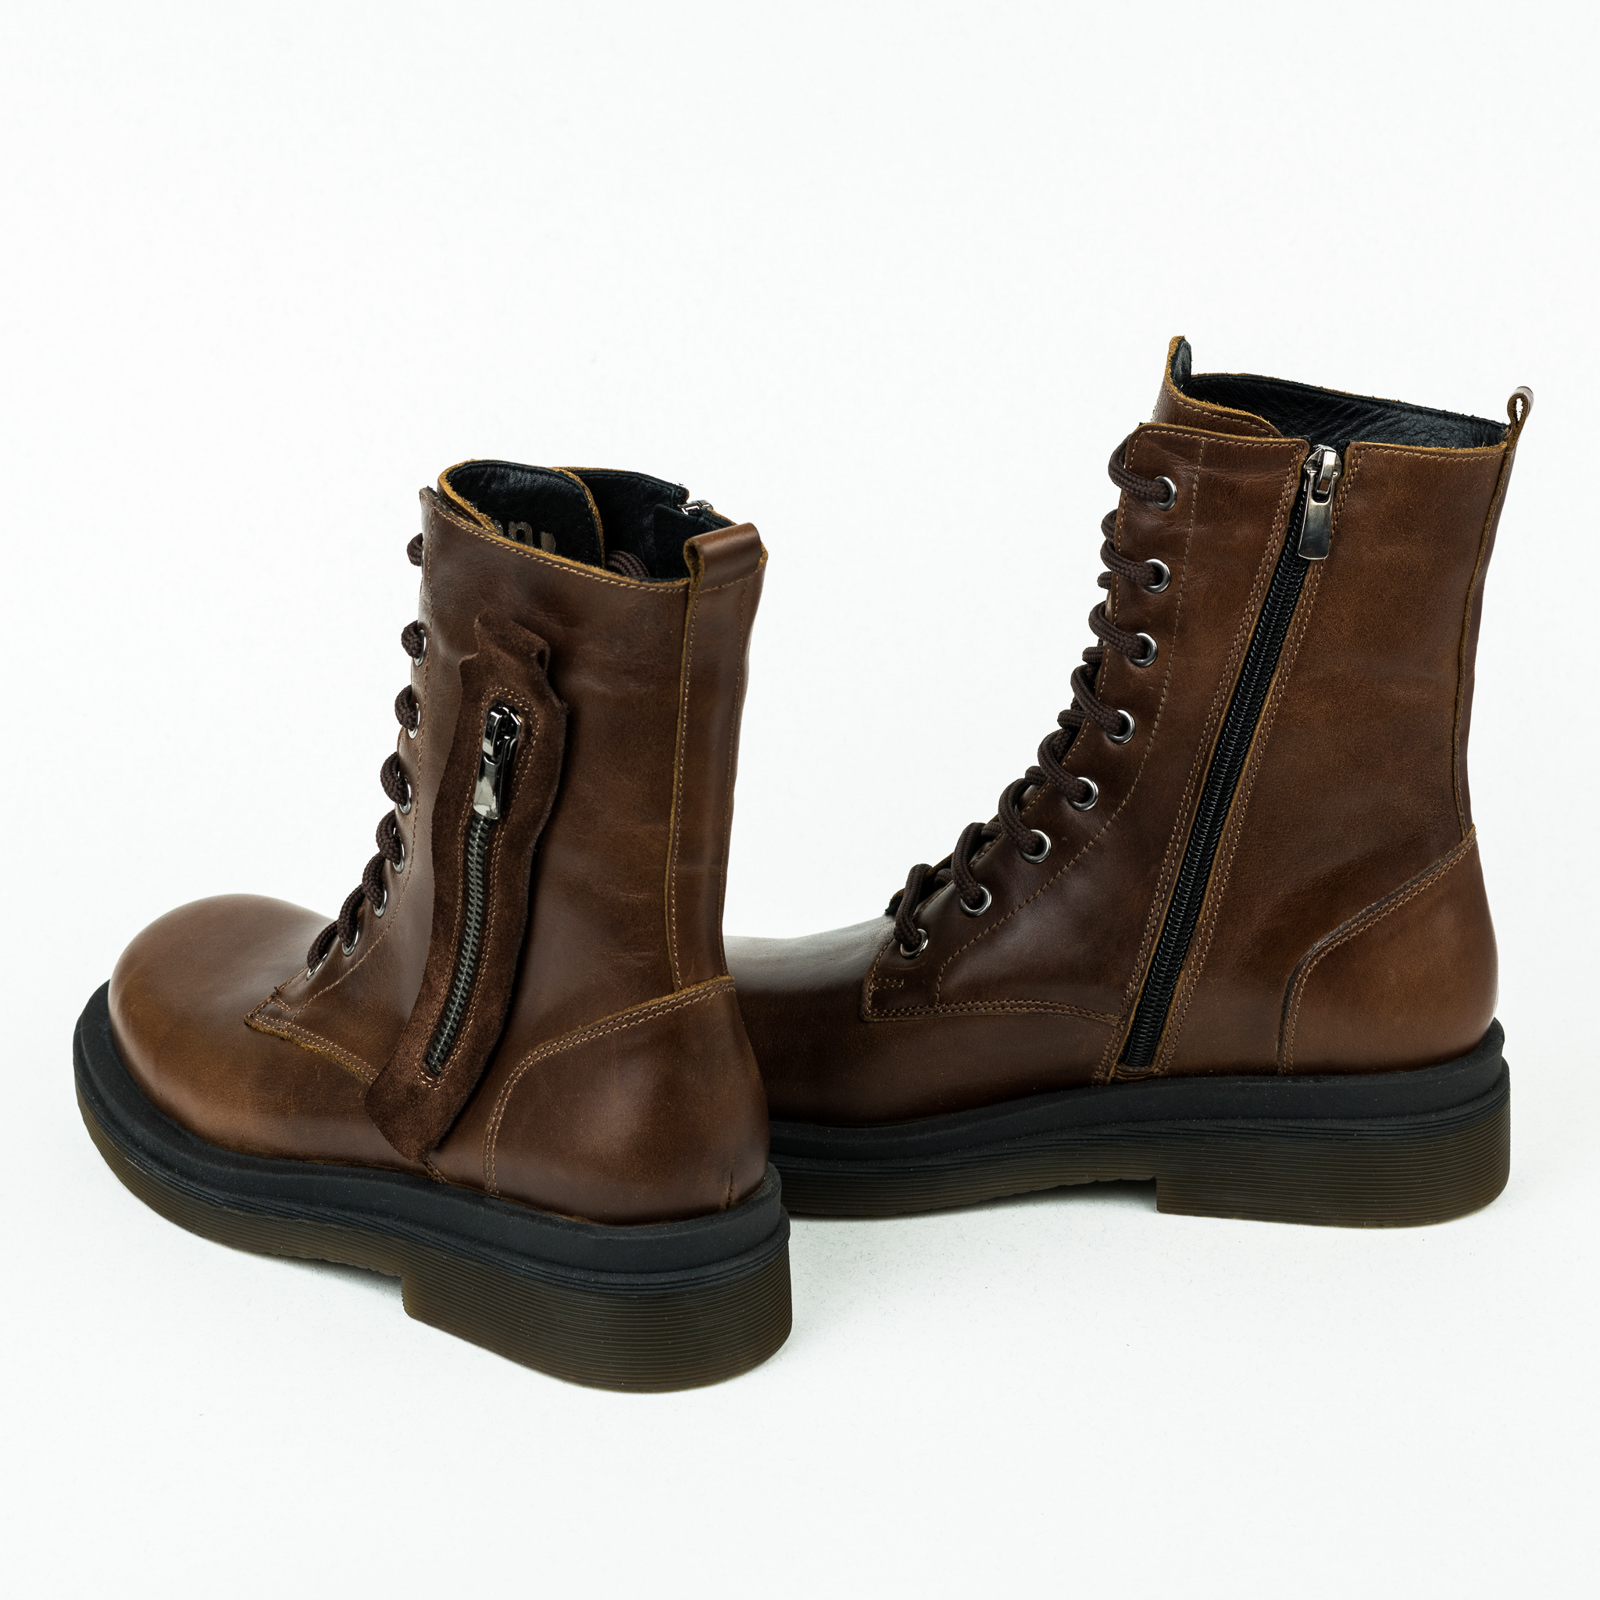 Leather ankle boots B058 - BROWN